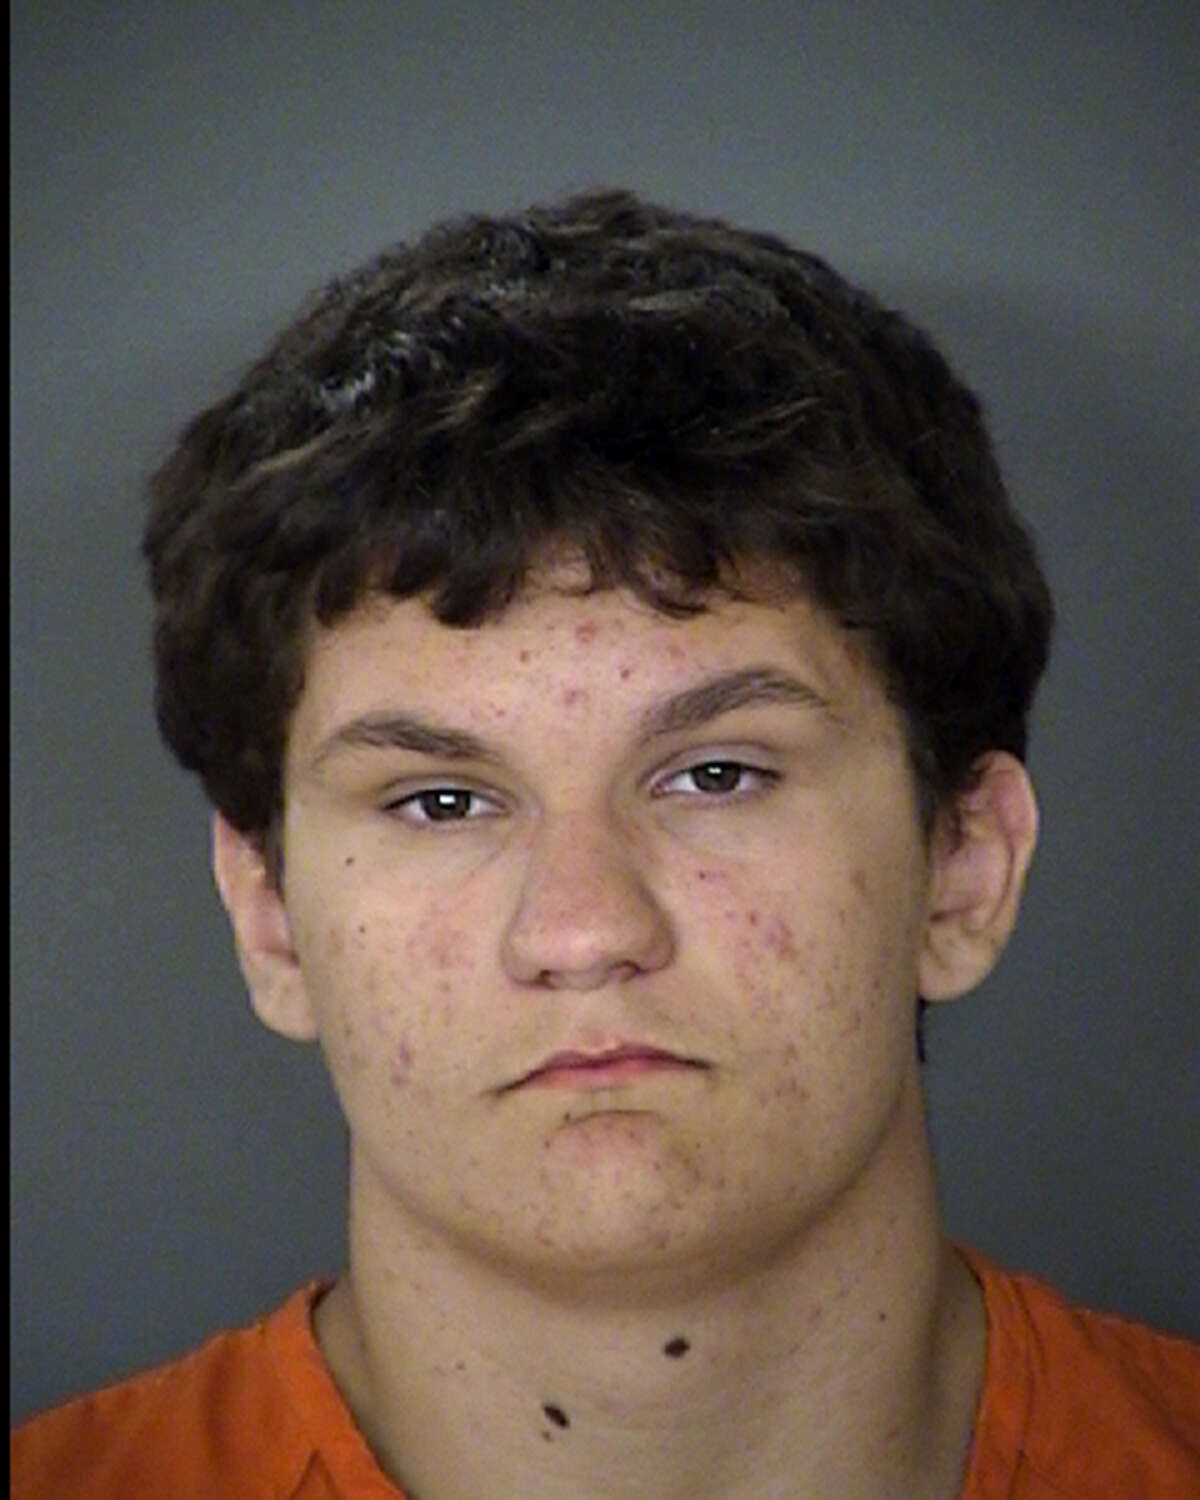 Brendan Tarwater brought an AK-47, two handguns and a Bowie knife to the school.